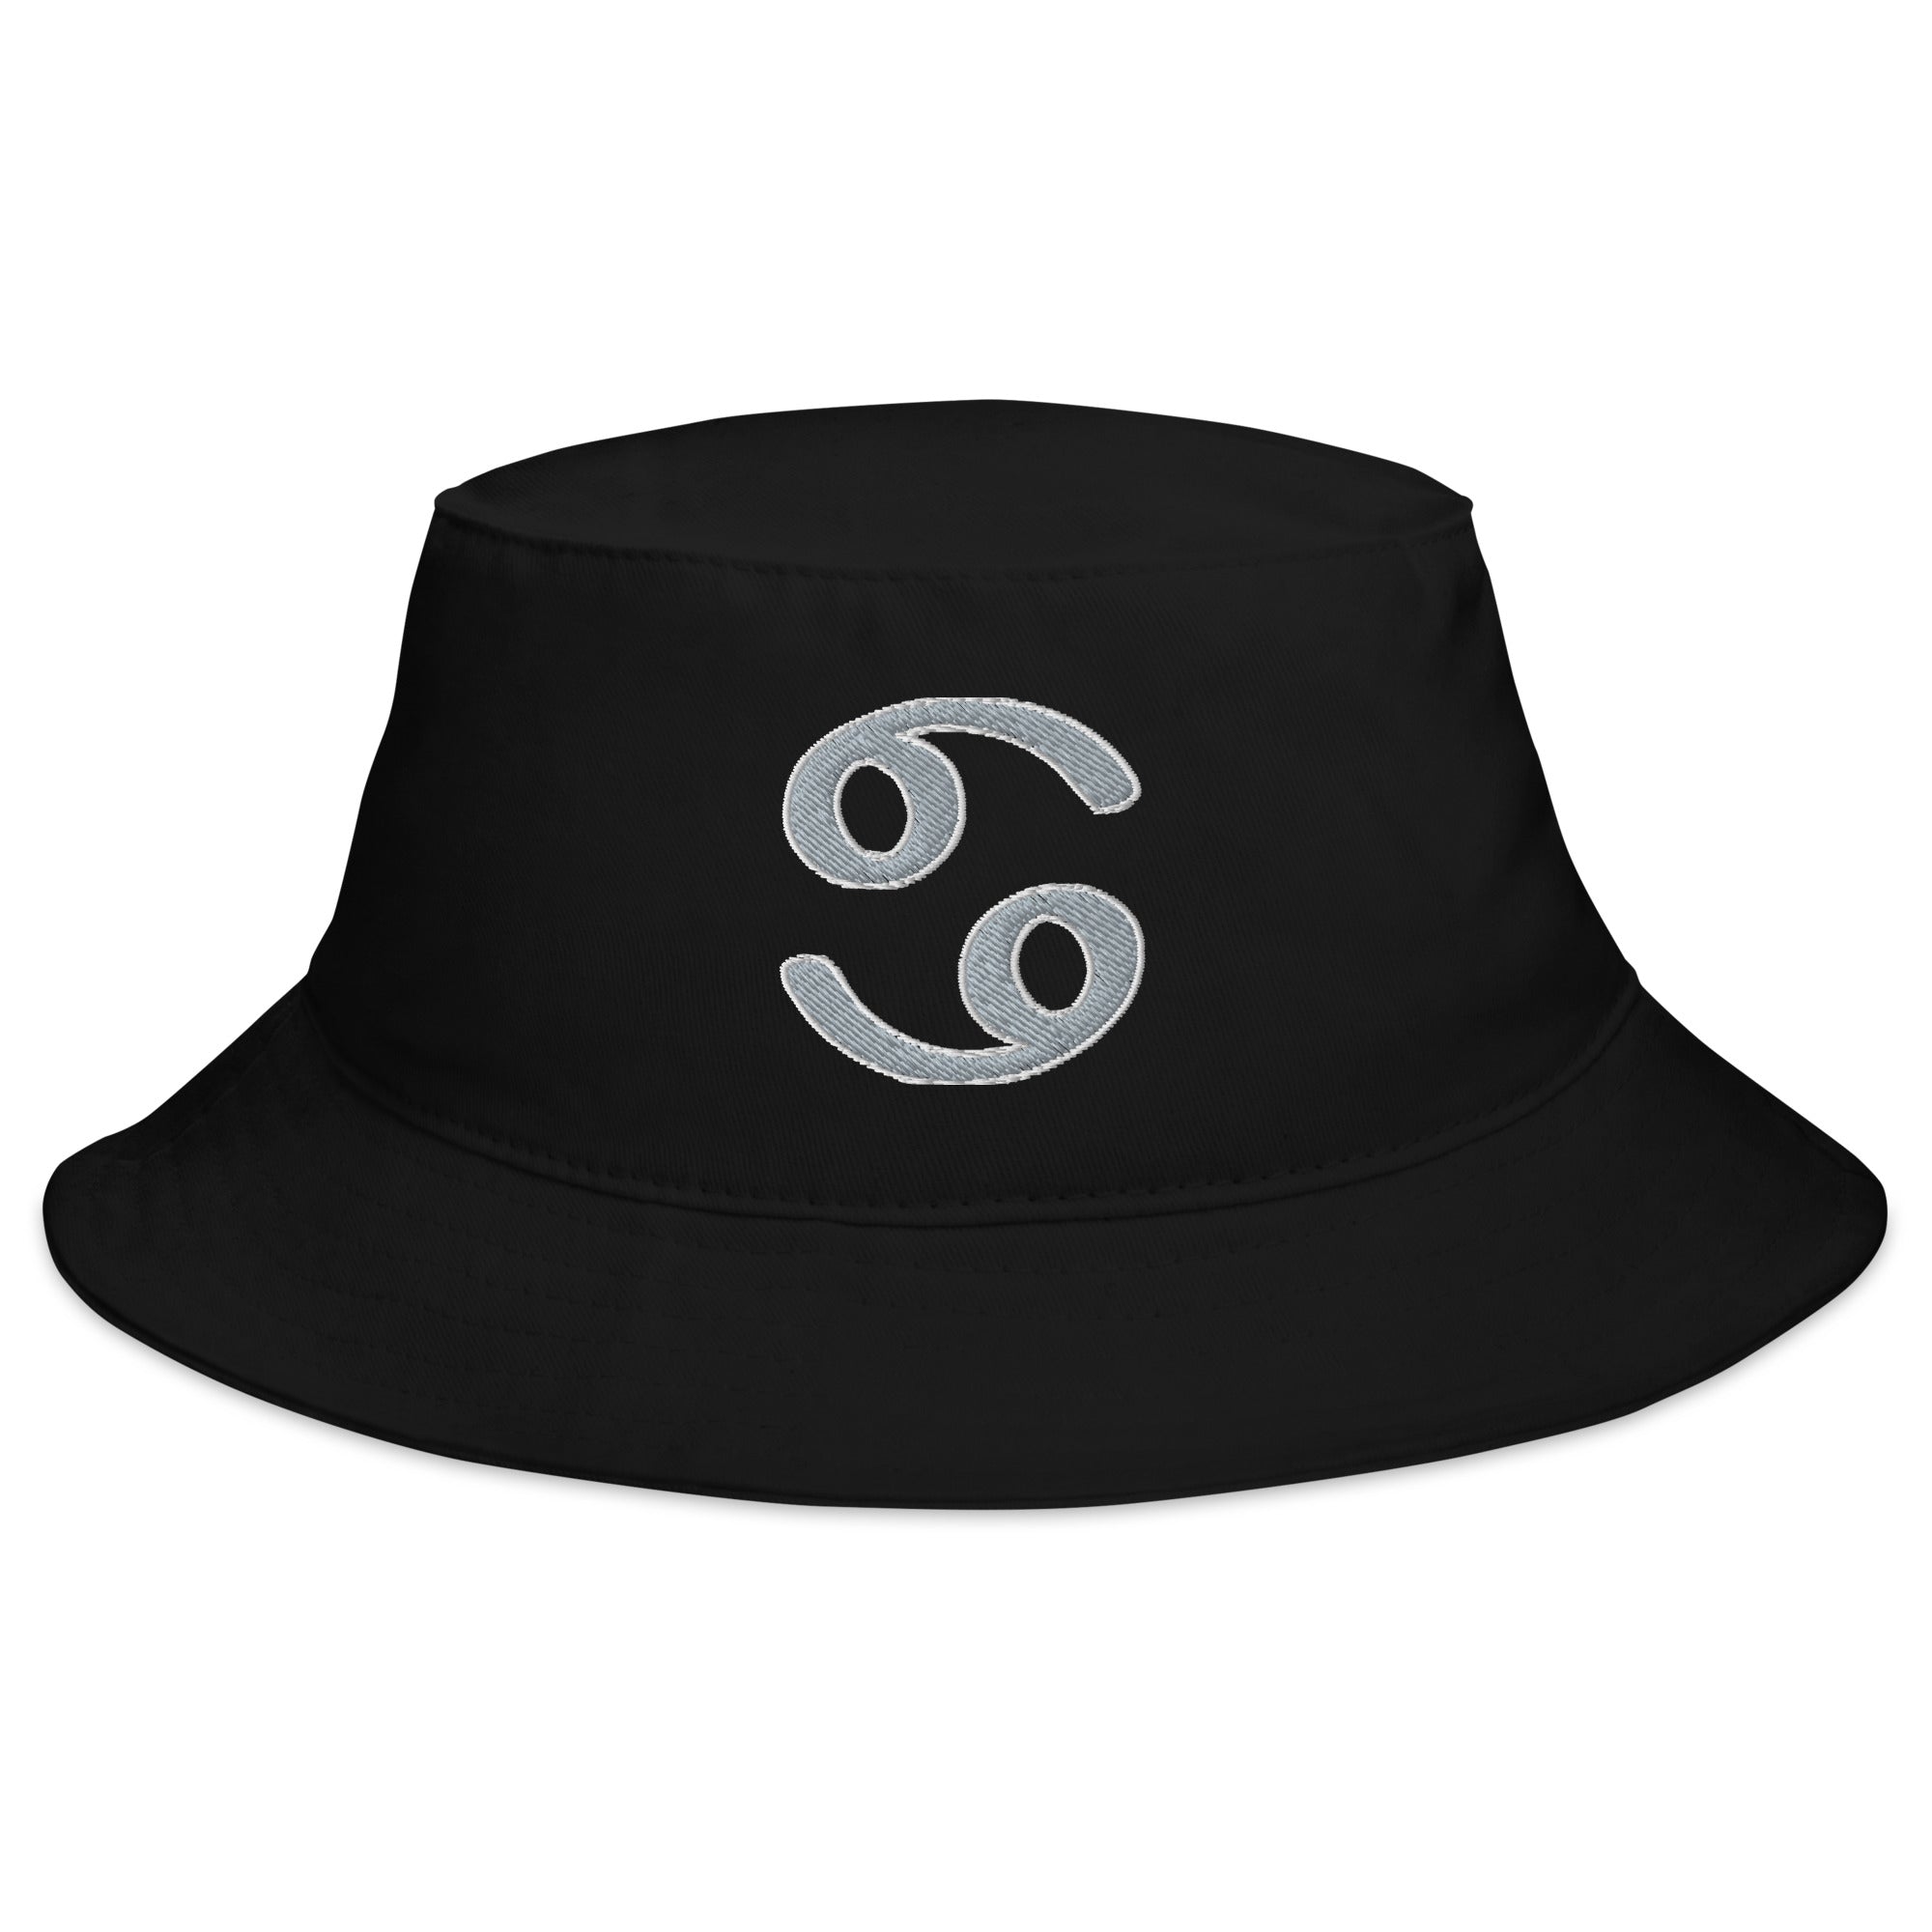 Zodiac Sign Cancer Embroidered Bucket Hat Astrology Horoscope